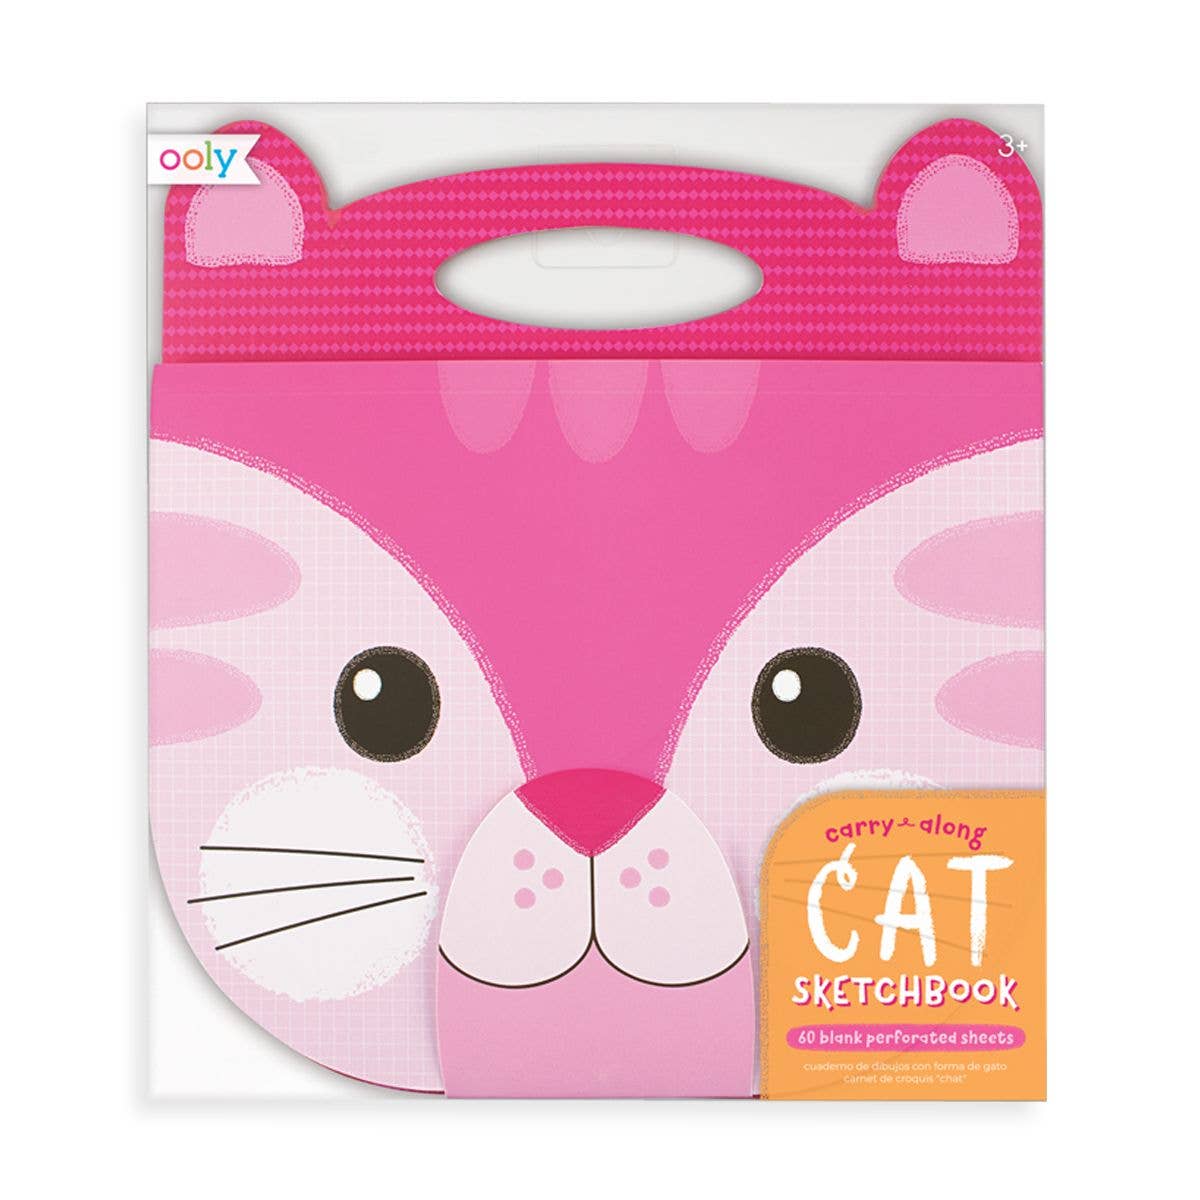 Ooly - Note Pals Sticky Tabs - Cat Parade